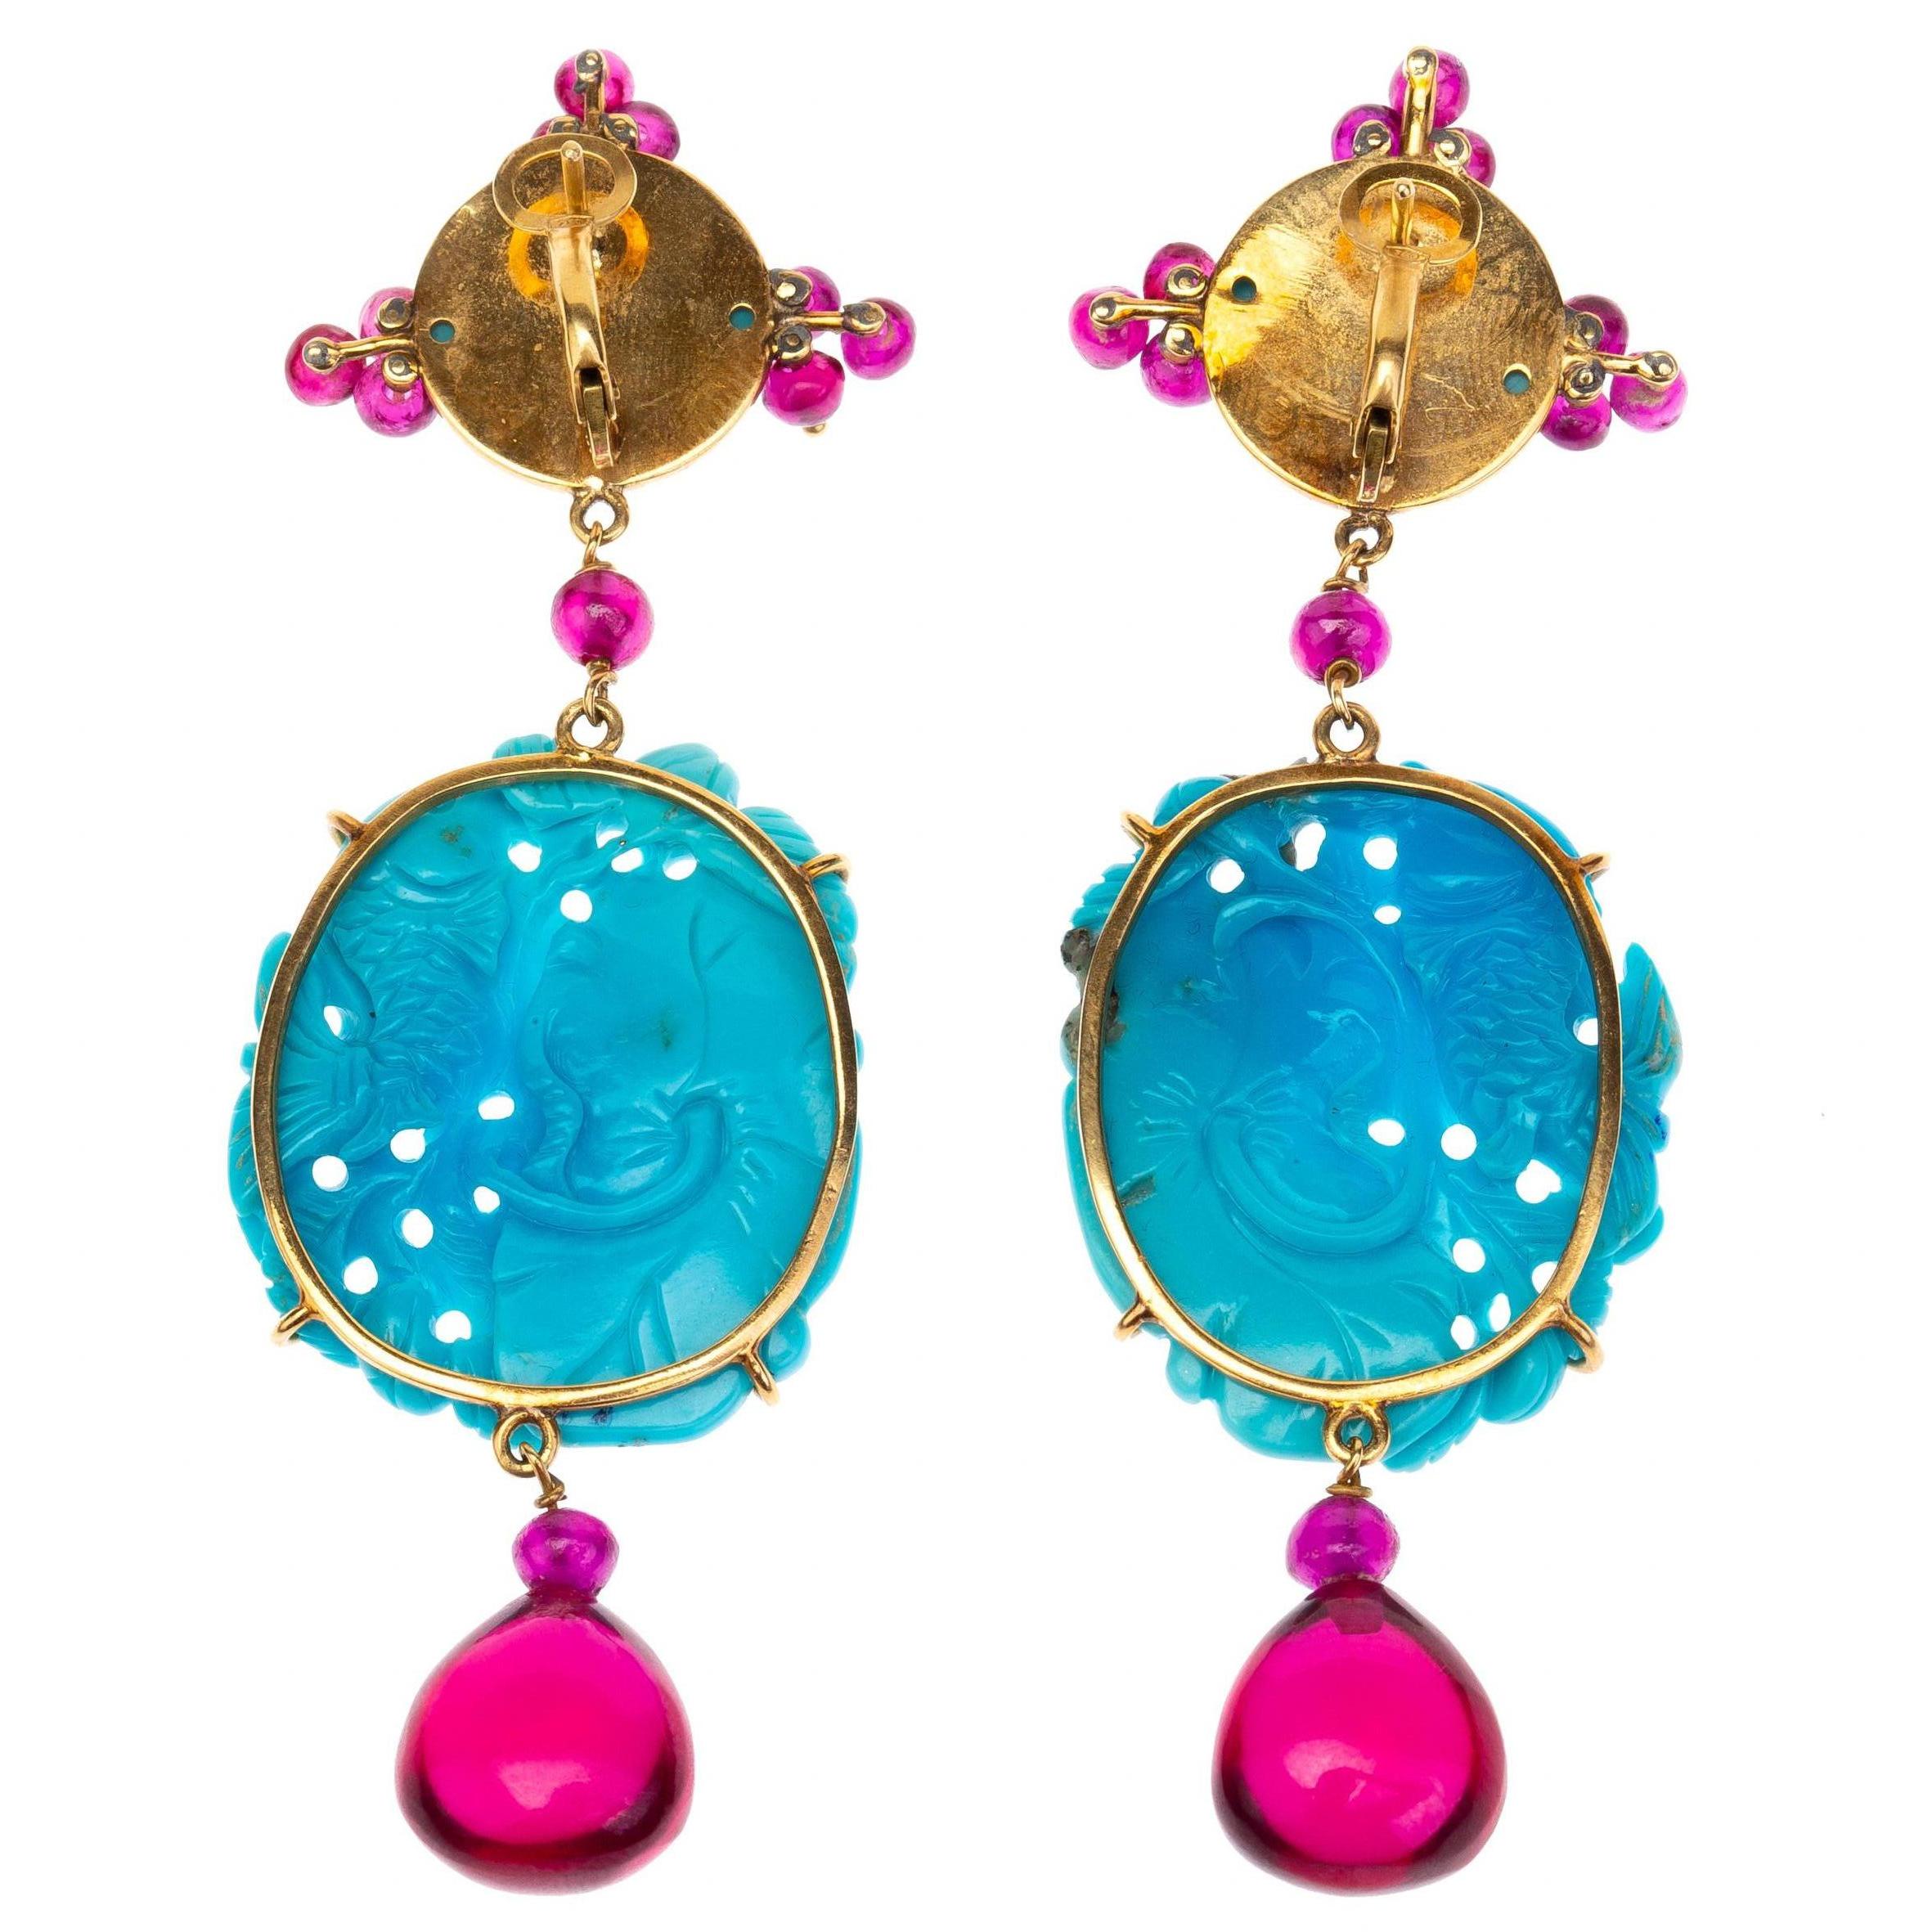 earrings with cabochon turquoise, carved antiques turquoise plaque with fish and lotus leafs rubellite drops gold.
total weight of each one 12,03 gr  total length 7cm. gold 16 gr 
All Giulia Colussi jewelry is new and has never been previously owned